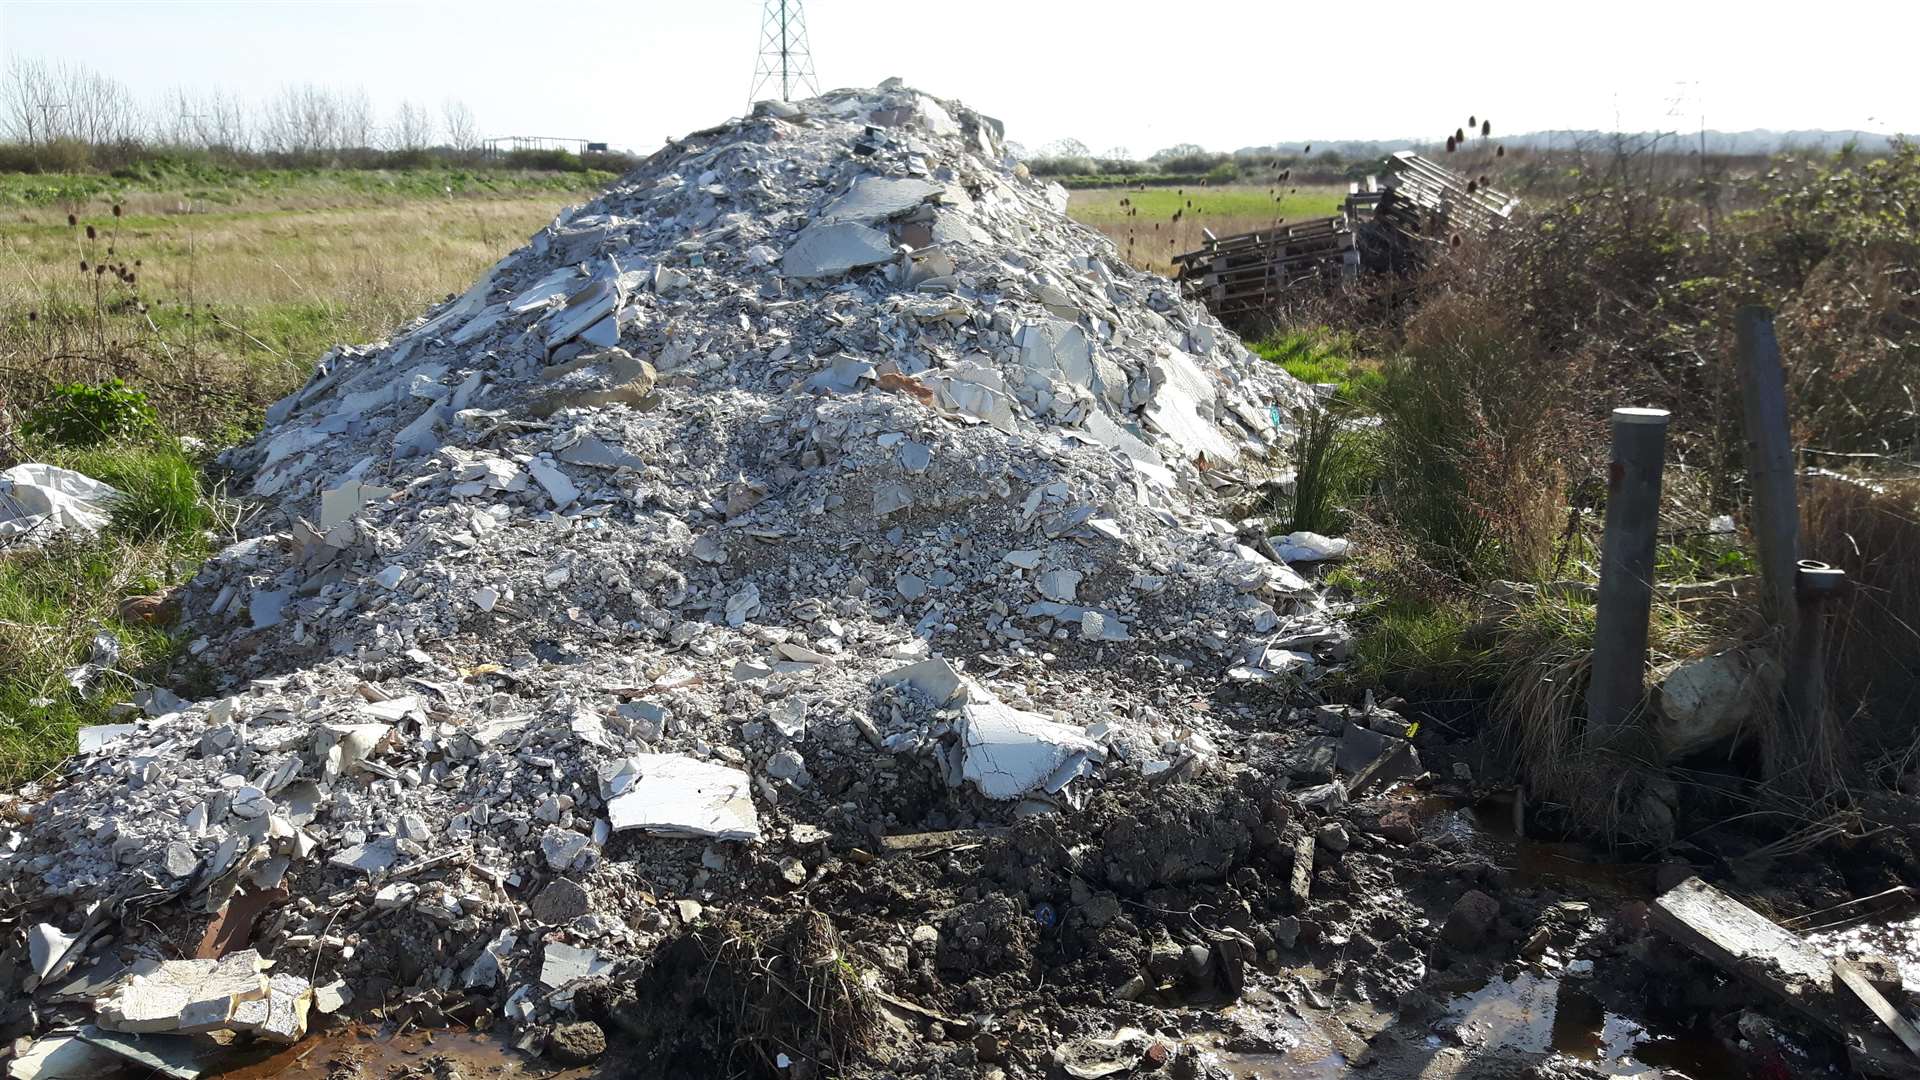 Fly-tipping near the Share and Coulter pub is said to have been the catalyst for action